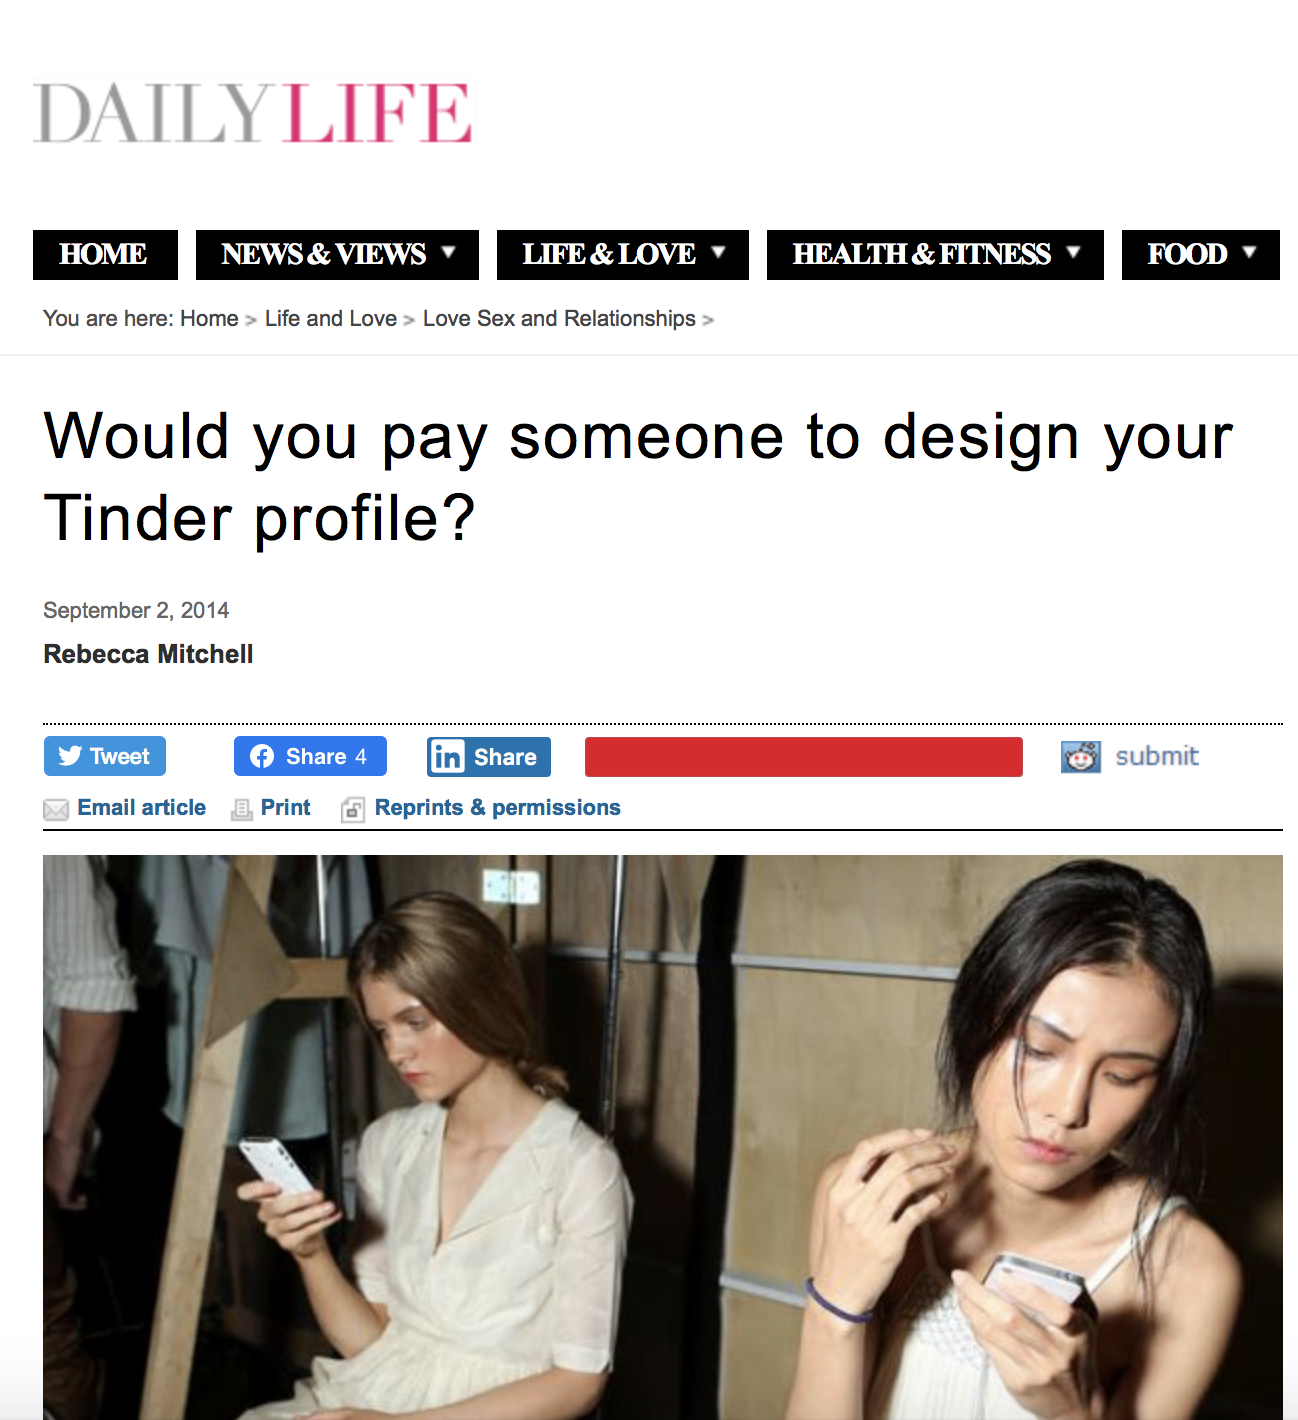 Would you pay someone to design your Tinder profile?